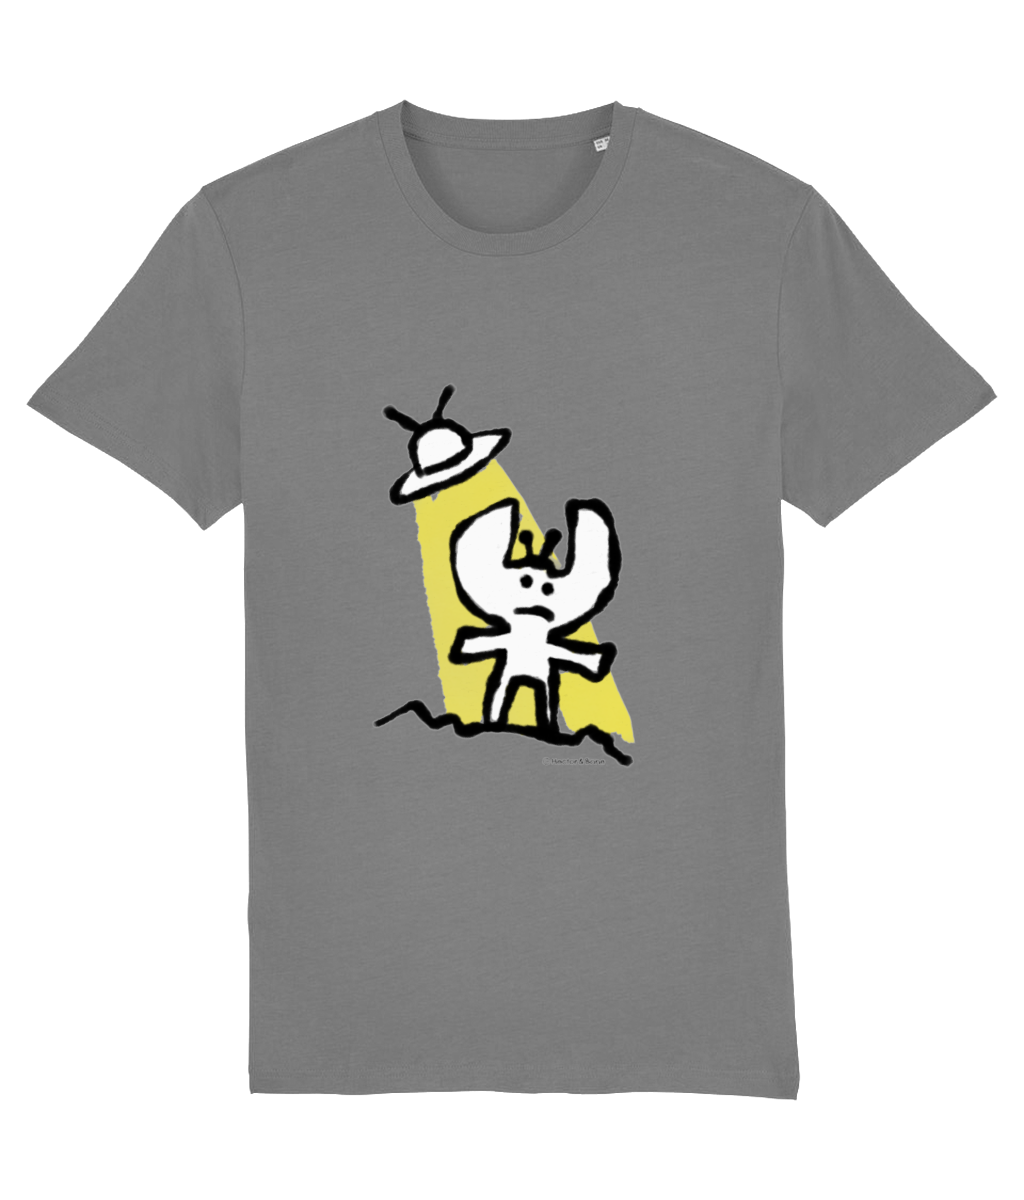 Alien T-shirt - Cute Alien landing t-shirt illustrated on a mid heather grey quality t-shirt by Hector and Bone